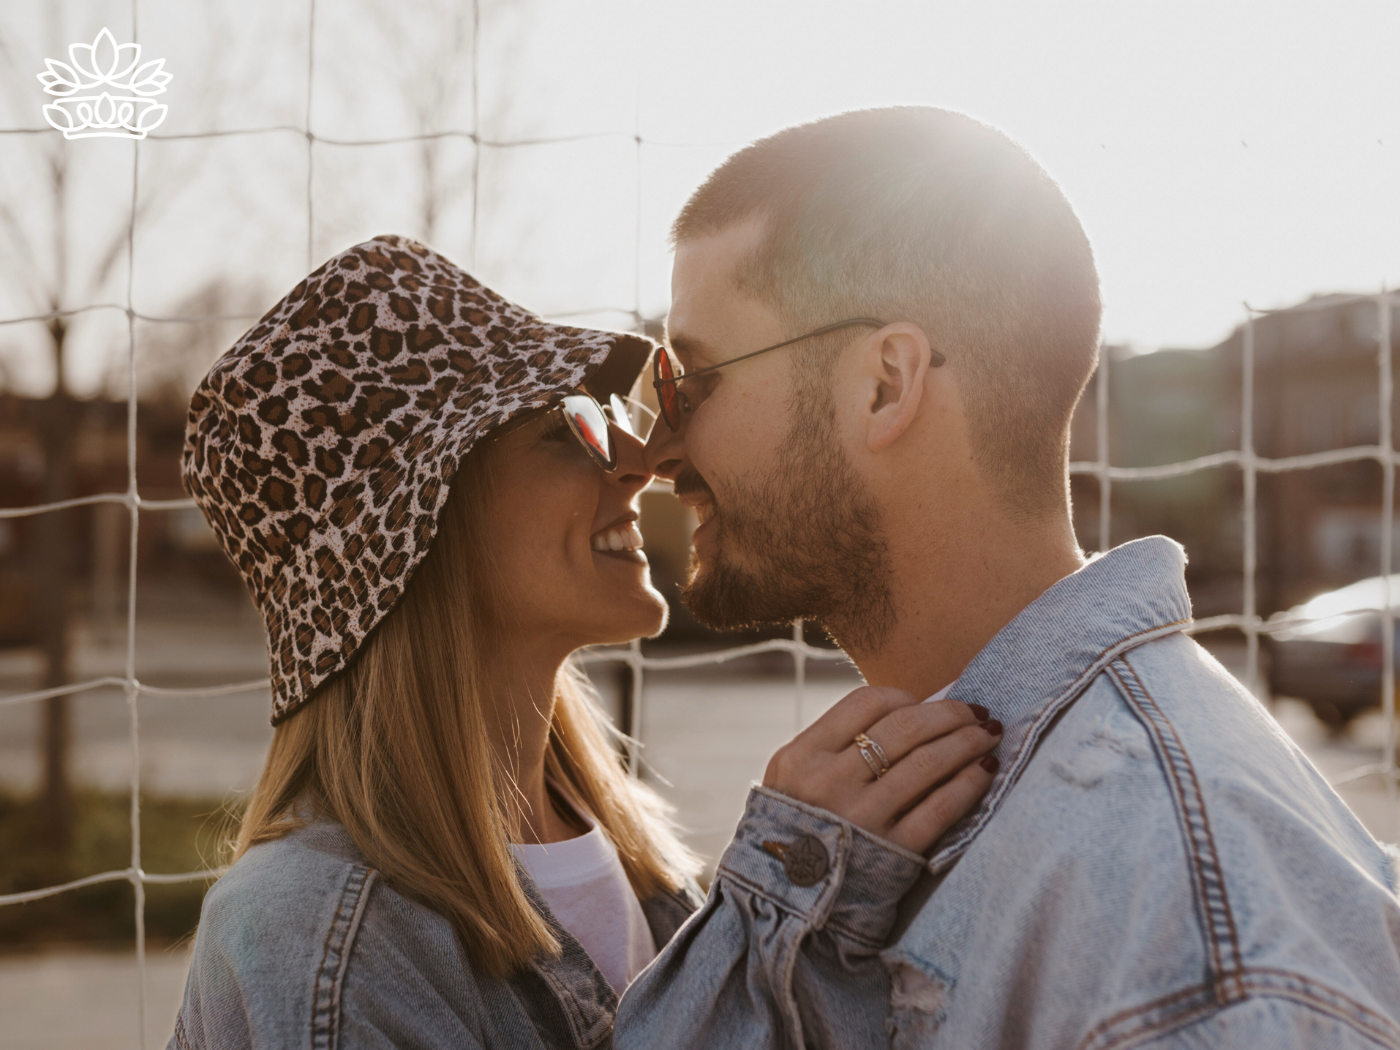 A couple smiling at each other in an intimate moment, wearing sunglasses and denim jackets, as the sun shines brightly behind them. Fabulous Flowers and Gifts. Gift Boxes for Boyfriend. Delivered with Heart.